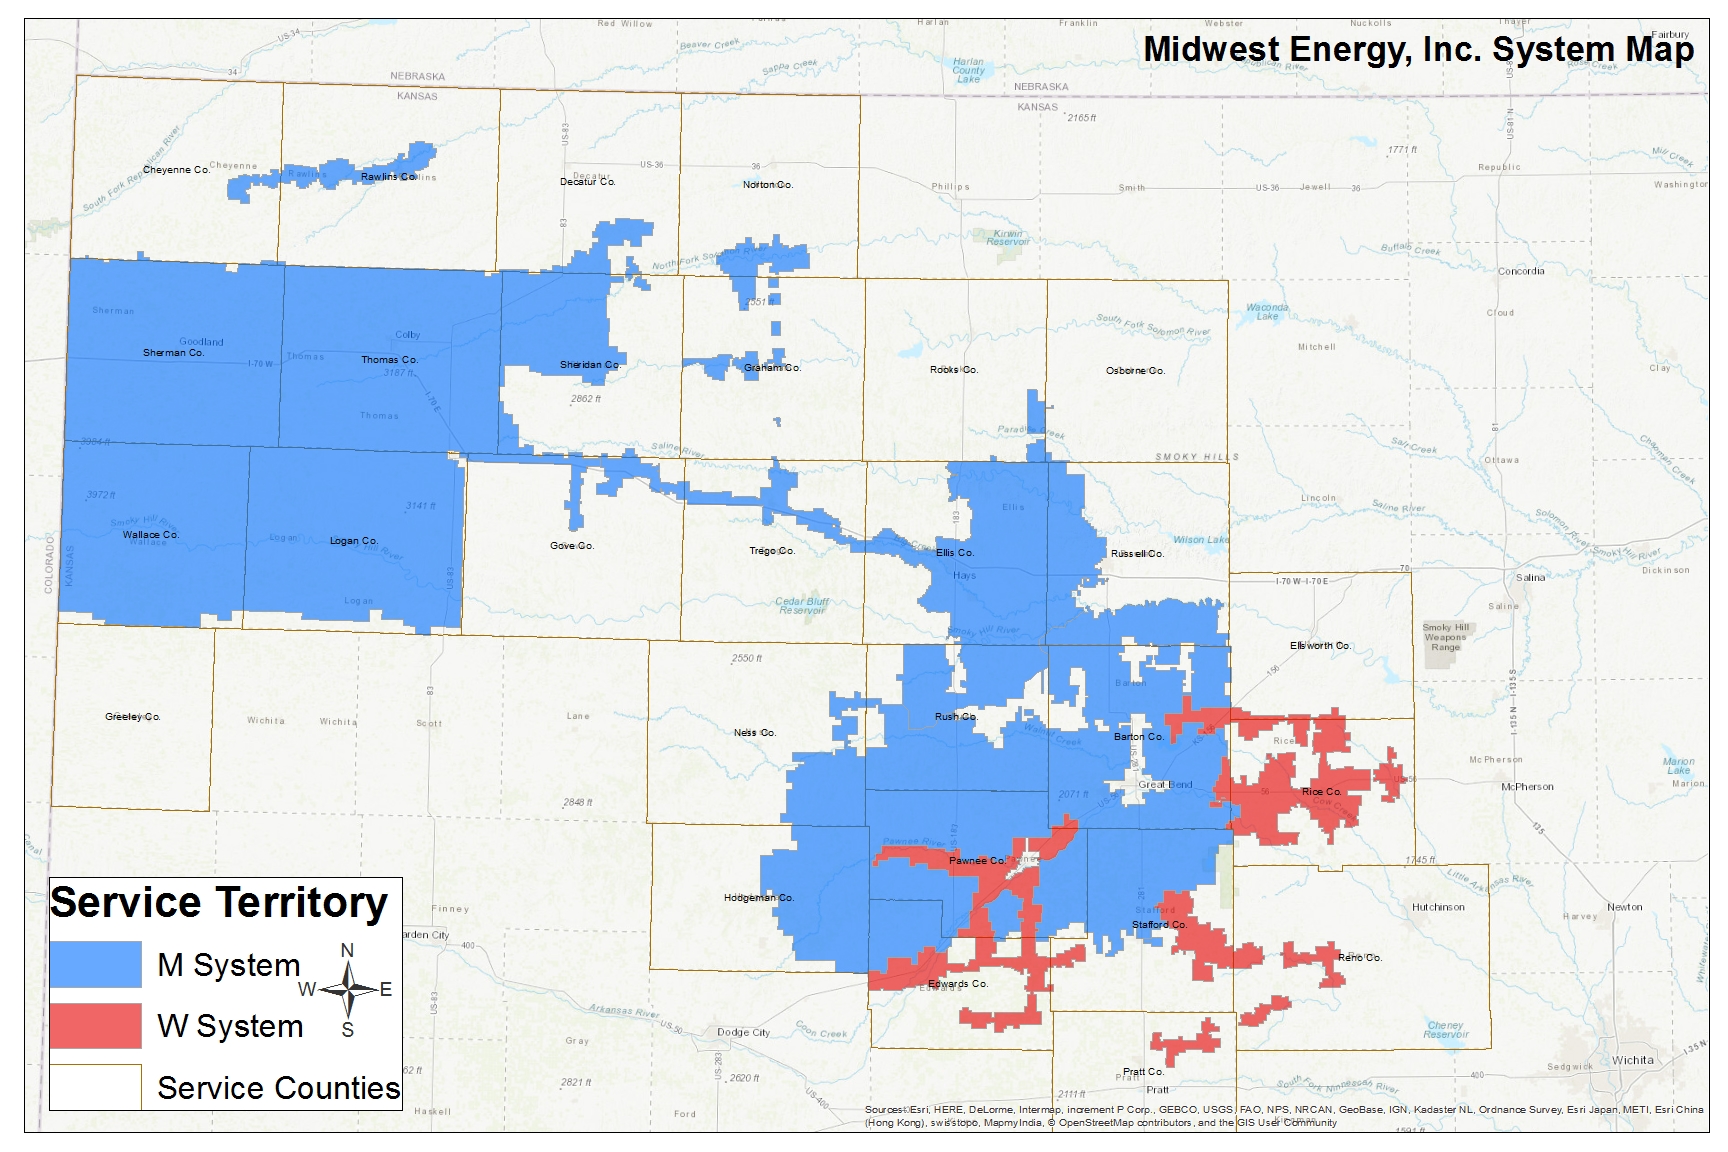 demand-rates-midwest-energy